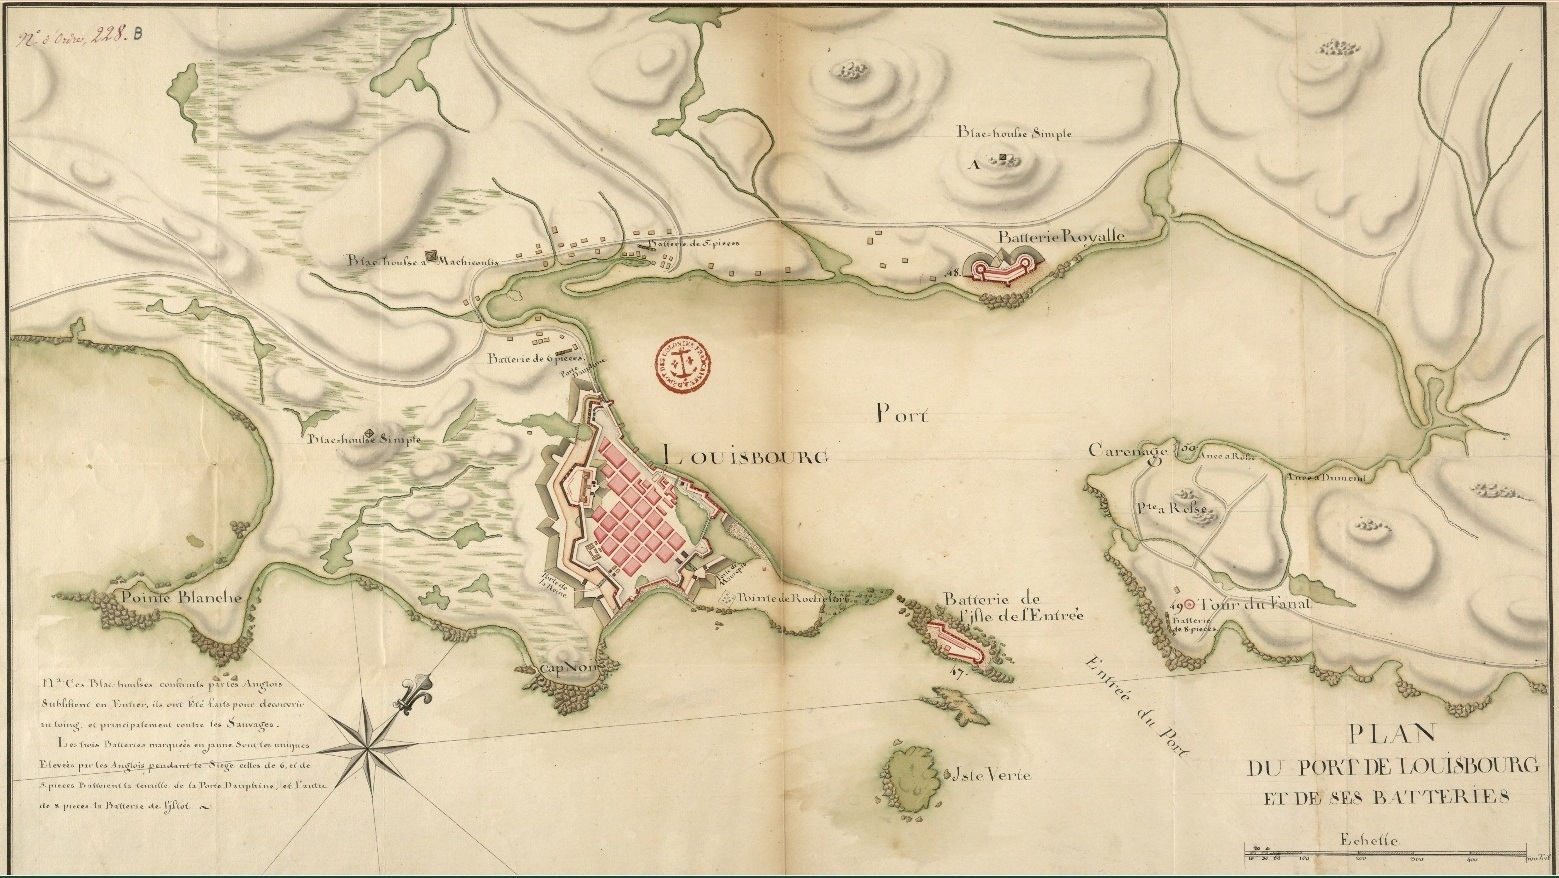 An old map showing the location of Fortress Louisbourg.